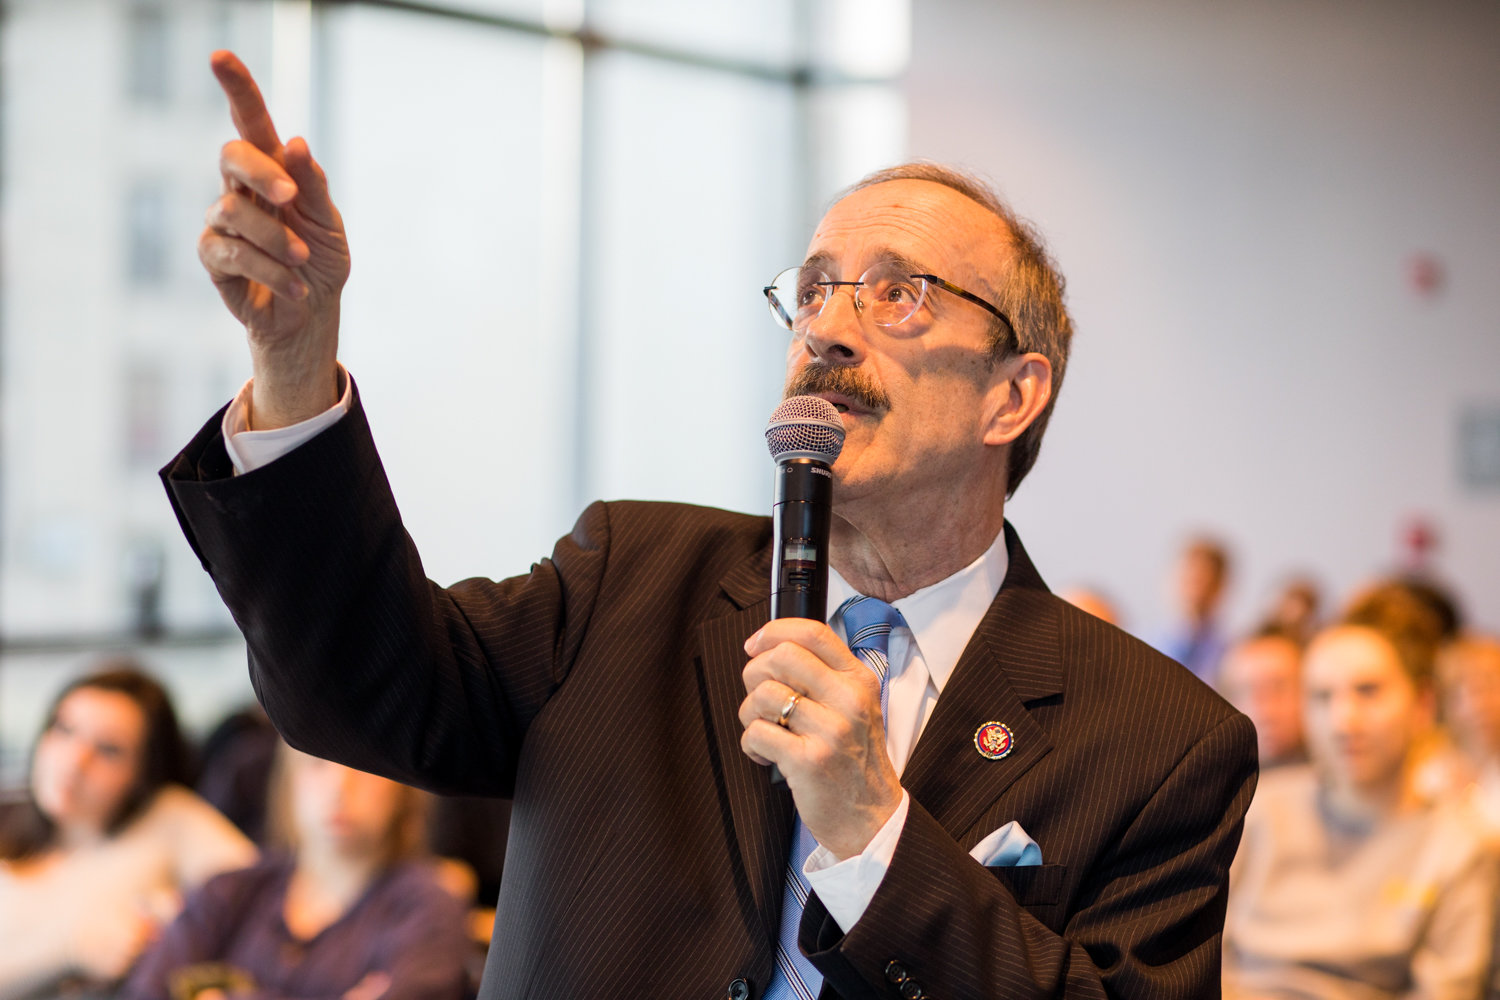 U.S. Rep. Engel is in one of New York's most expensive congressional primary races, but a new report says he's nowhere near the people he's asking to cast votes for him.